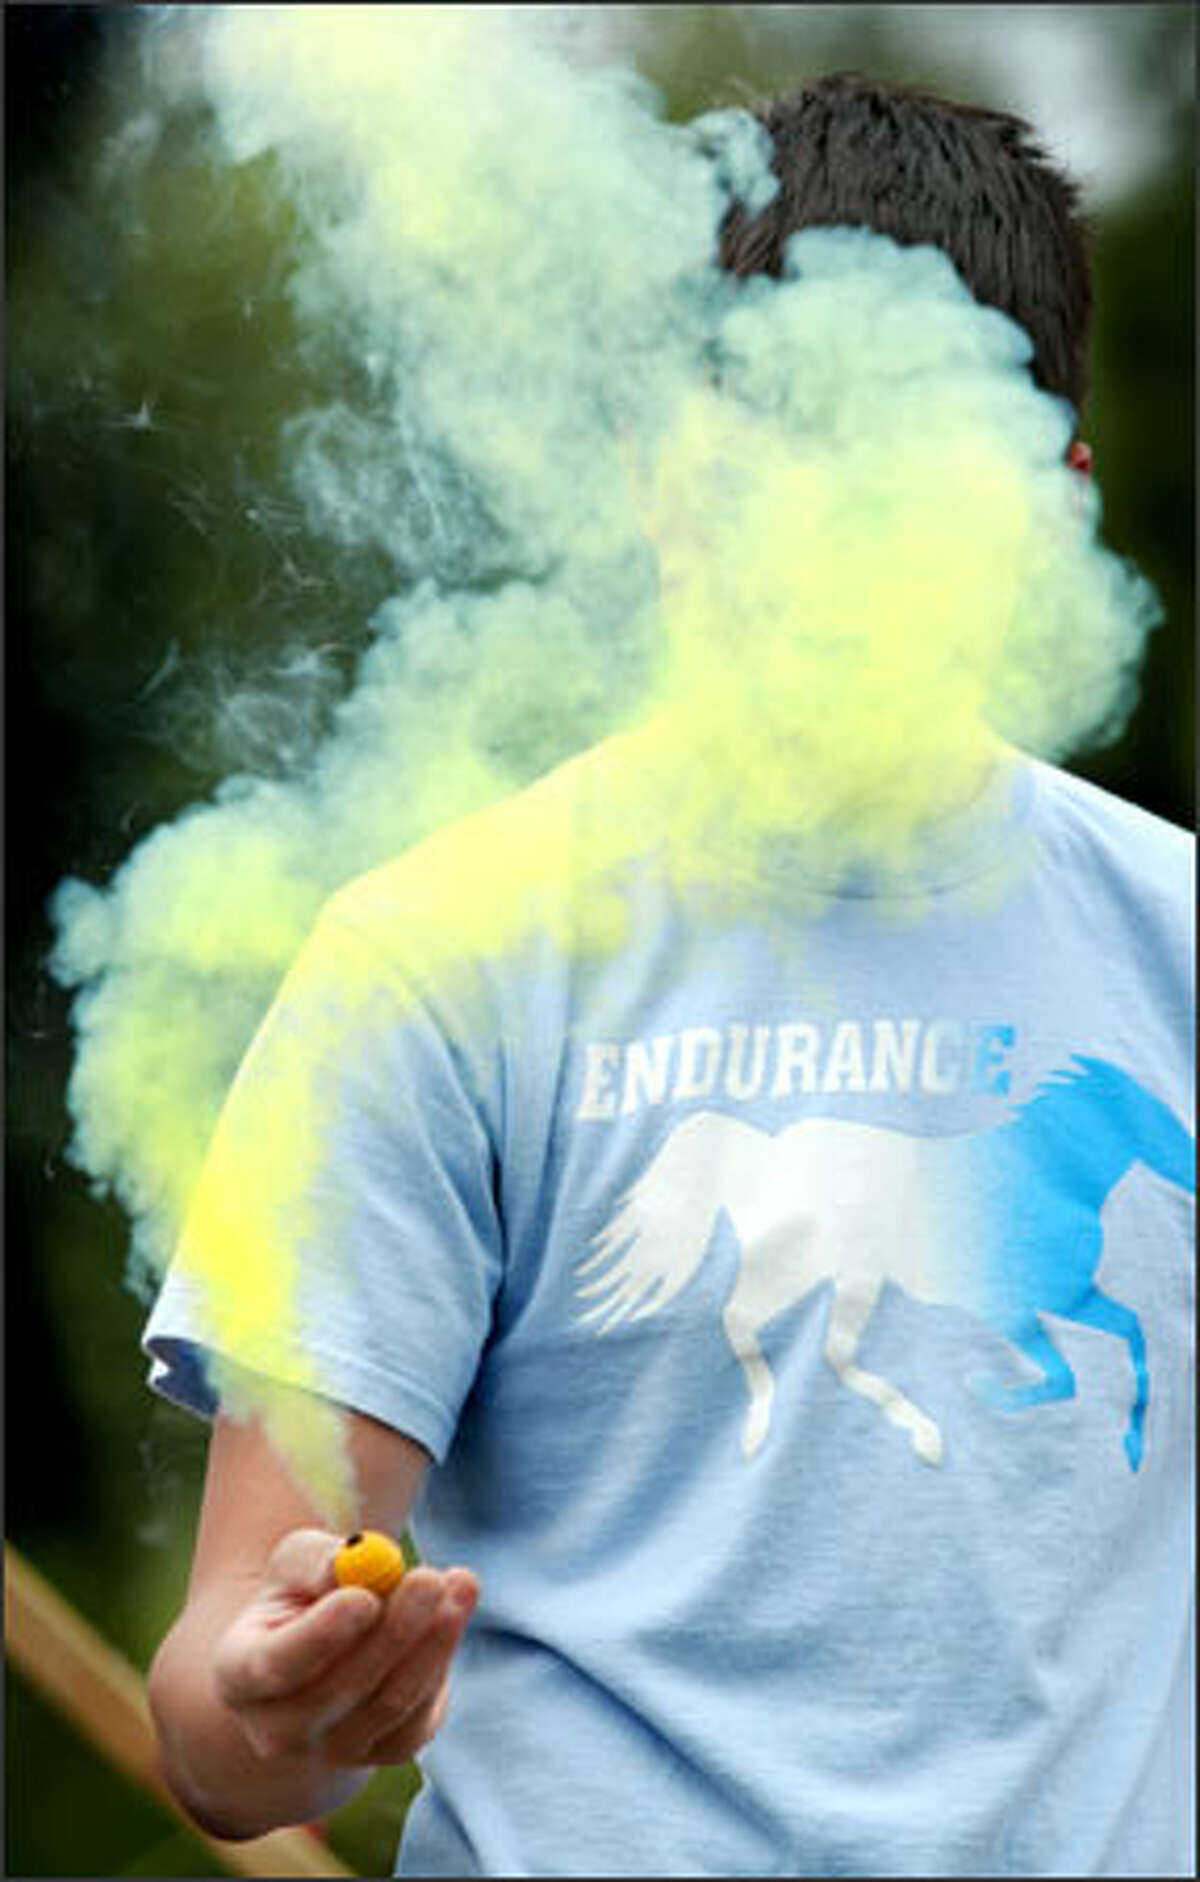 This is no smoke screen: David Montano tests a smoke bomb at Boom City, the Tulalip Tribes' fireworks emporium. Montano and his friends were shopping yesterday for fireworks for the Fourth of July.